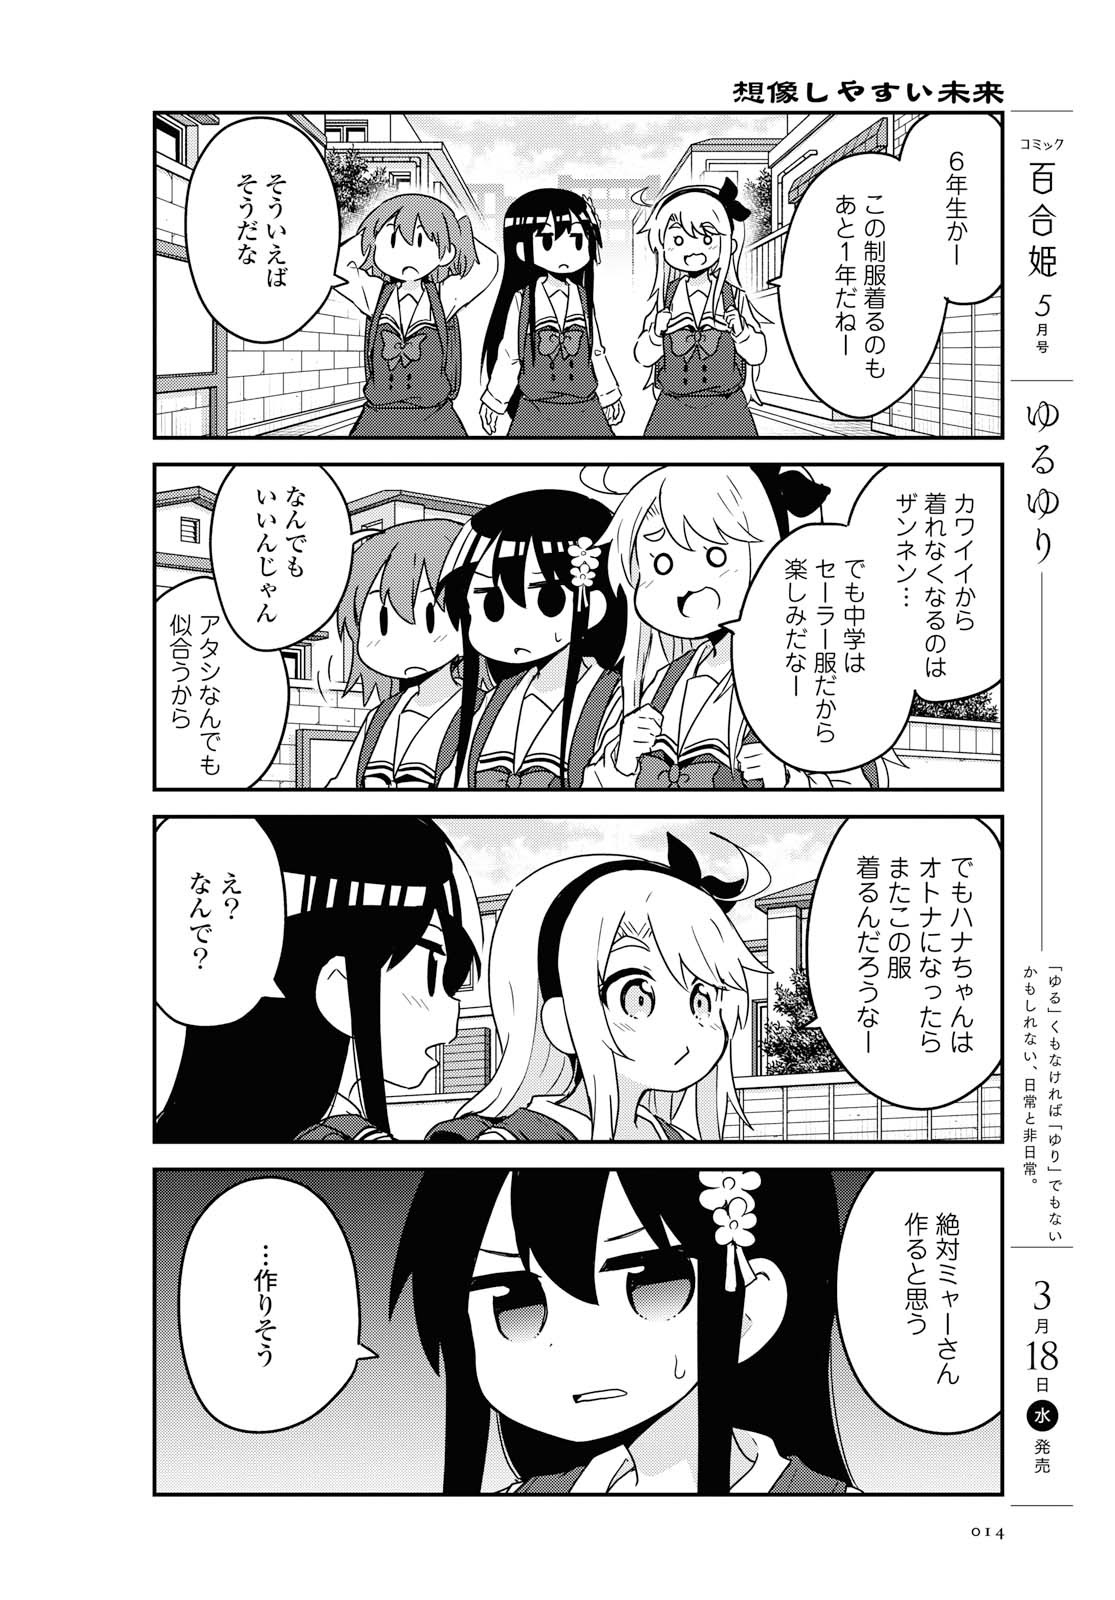 Wataten! An Angel Flew Down to Me 私に天使が舞い降りた！ 第61話 - Page 7